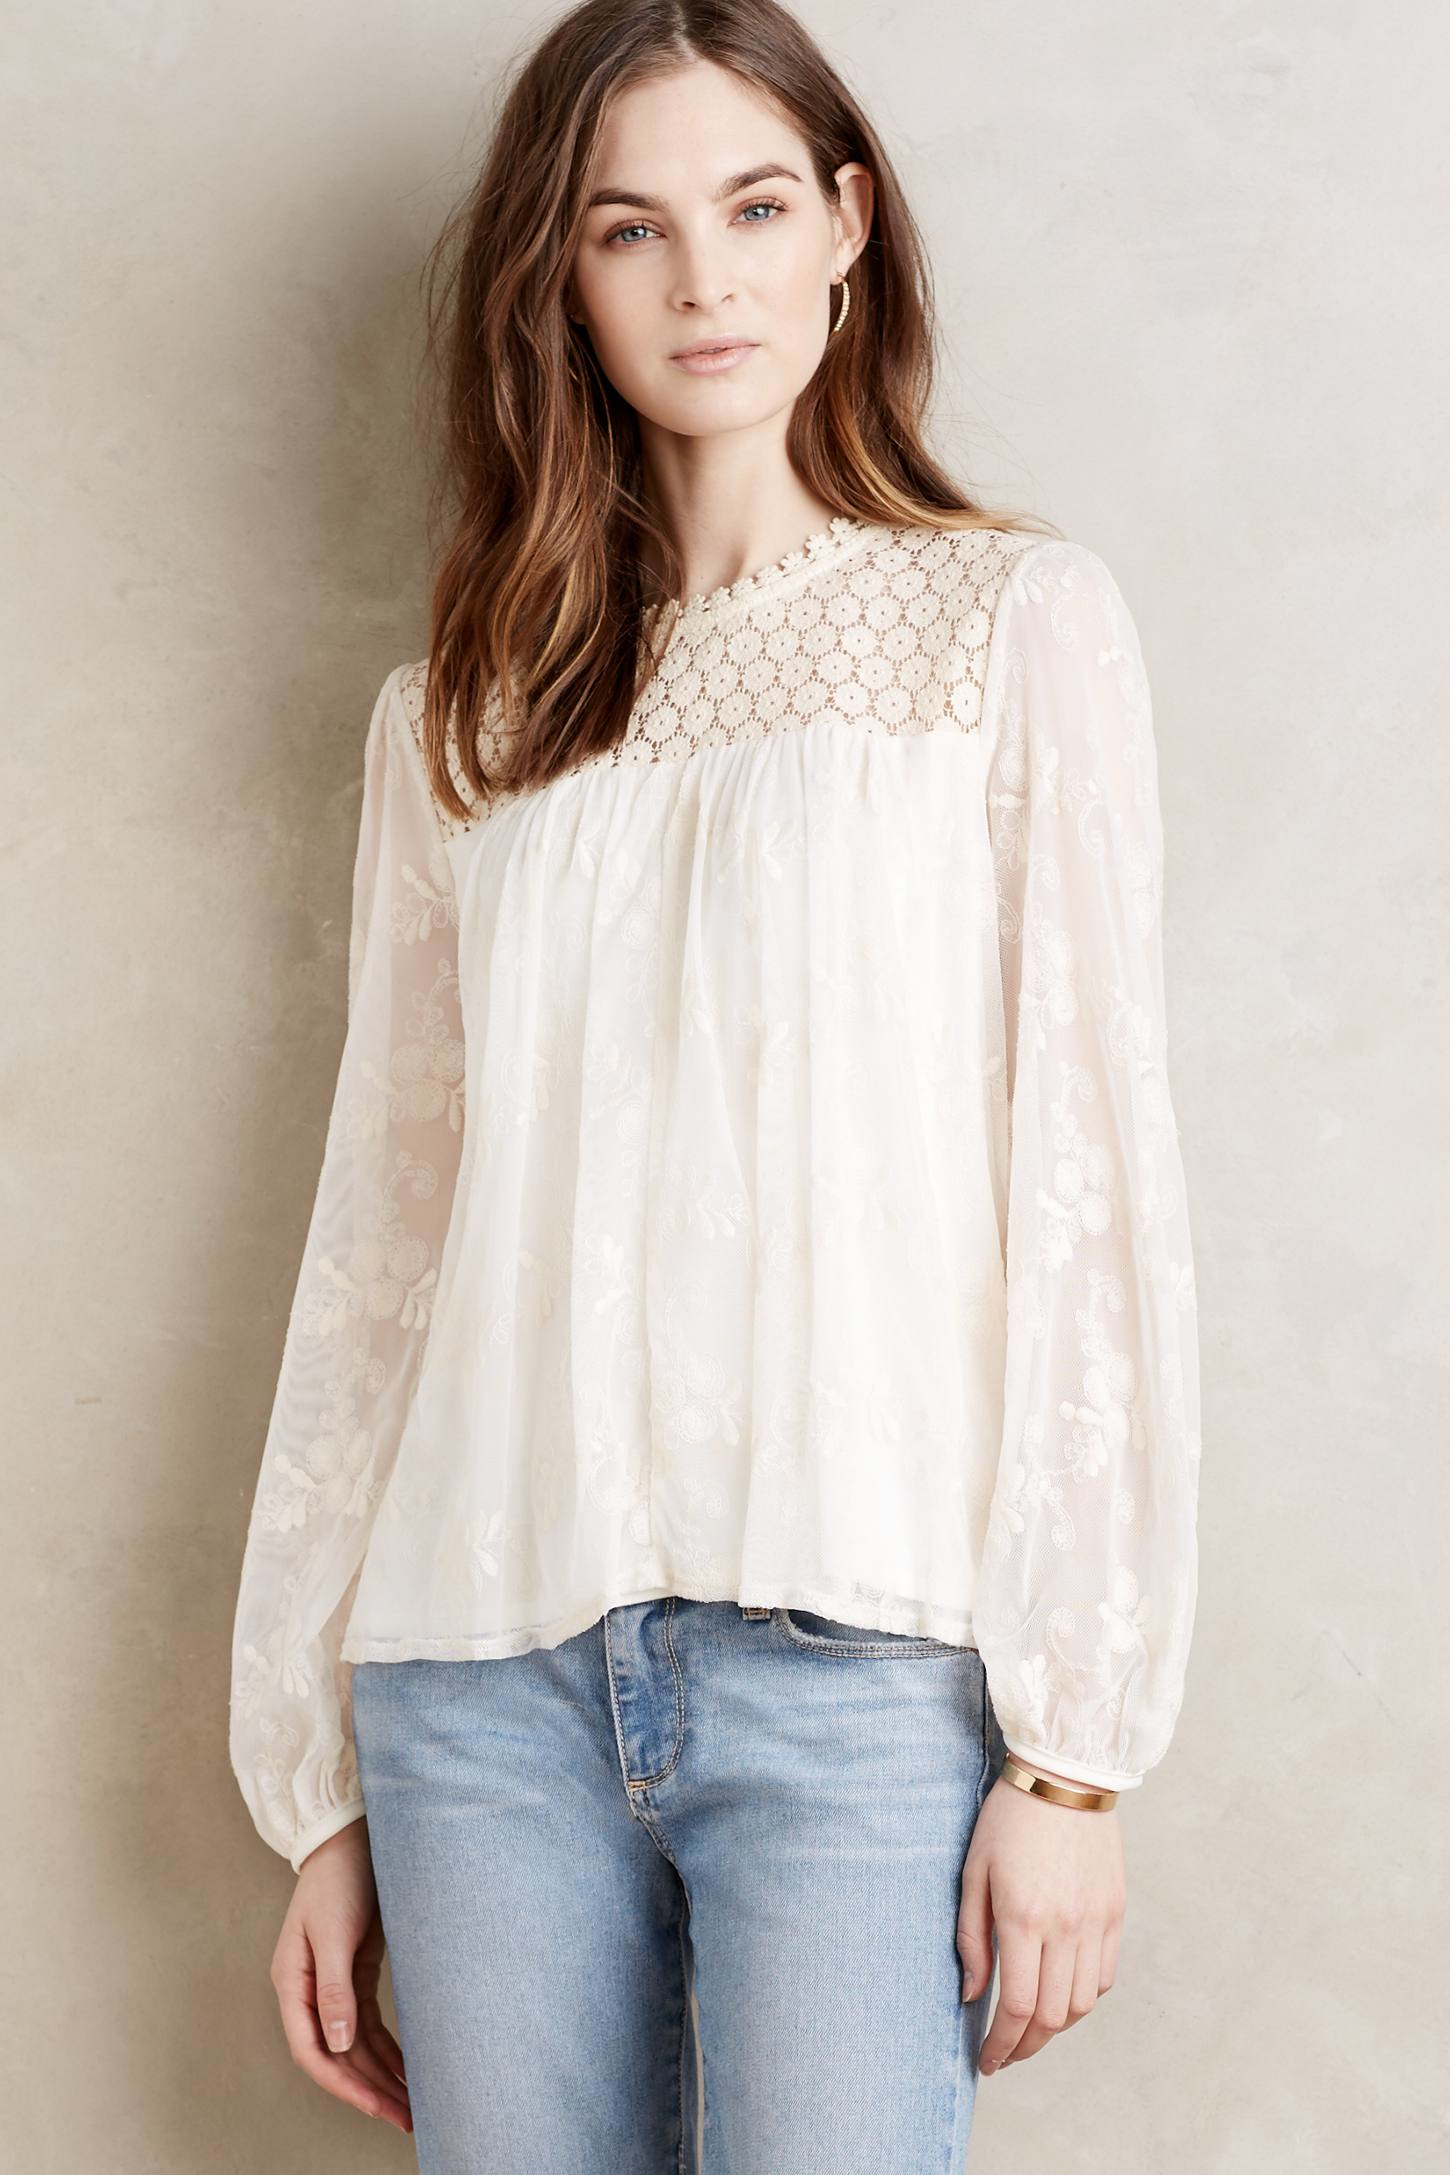 Lyst - Everleigh Embroidered Lace Peasant Blouse in White